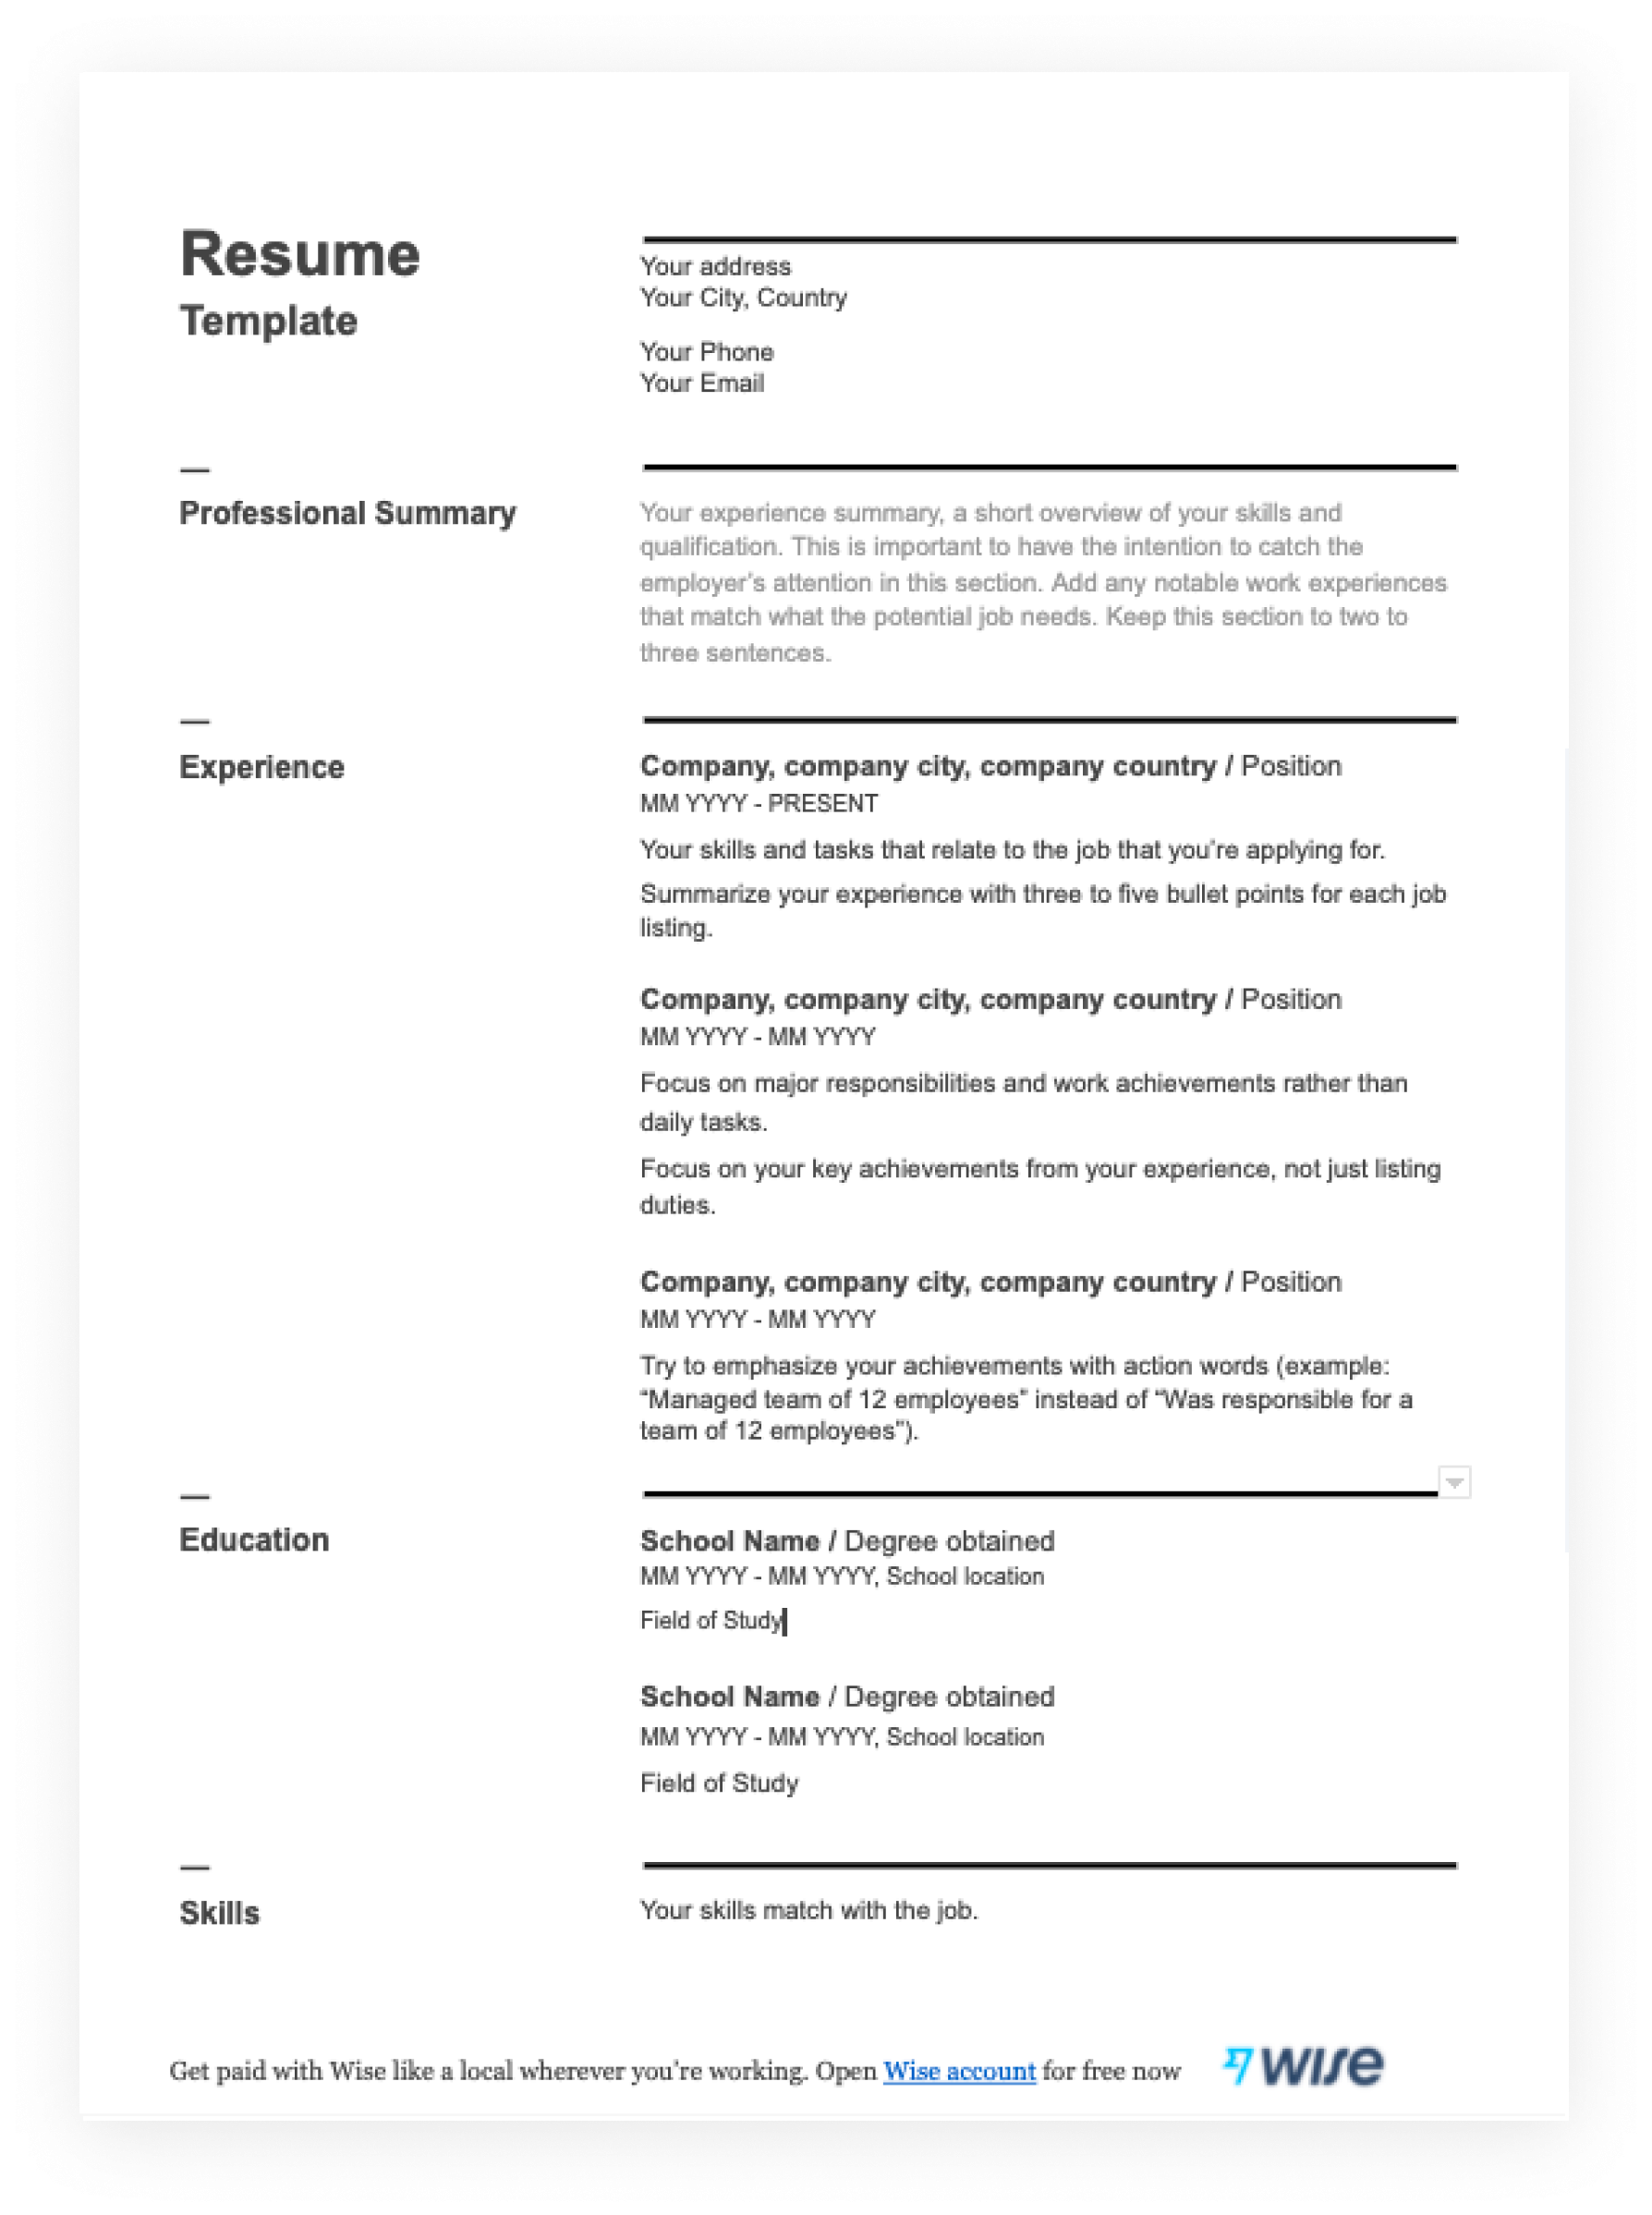 Resume Templates In Pdf - Free For Download - Wise